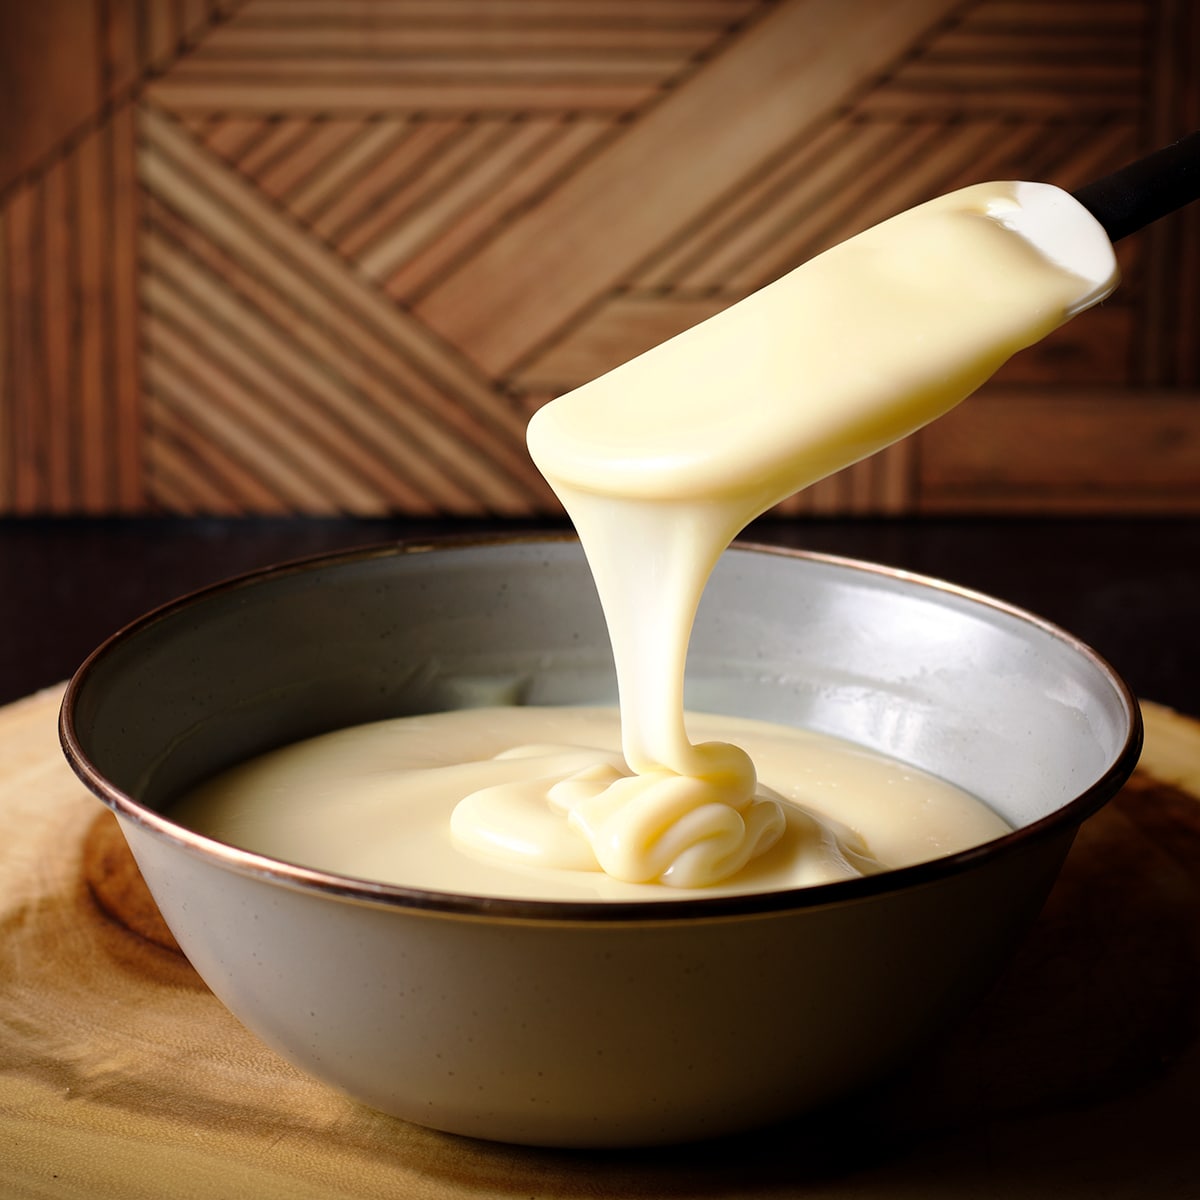 Someone lifting a rubber spatula from a bowl of white chocolate ganache so the ganache is dripping from the spatula back into the bowl in smooth, creamy ribbons.